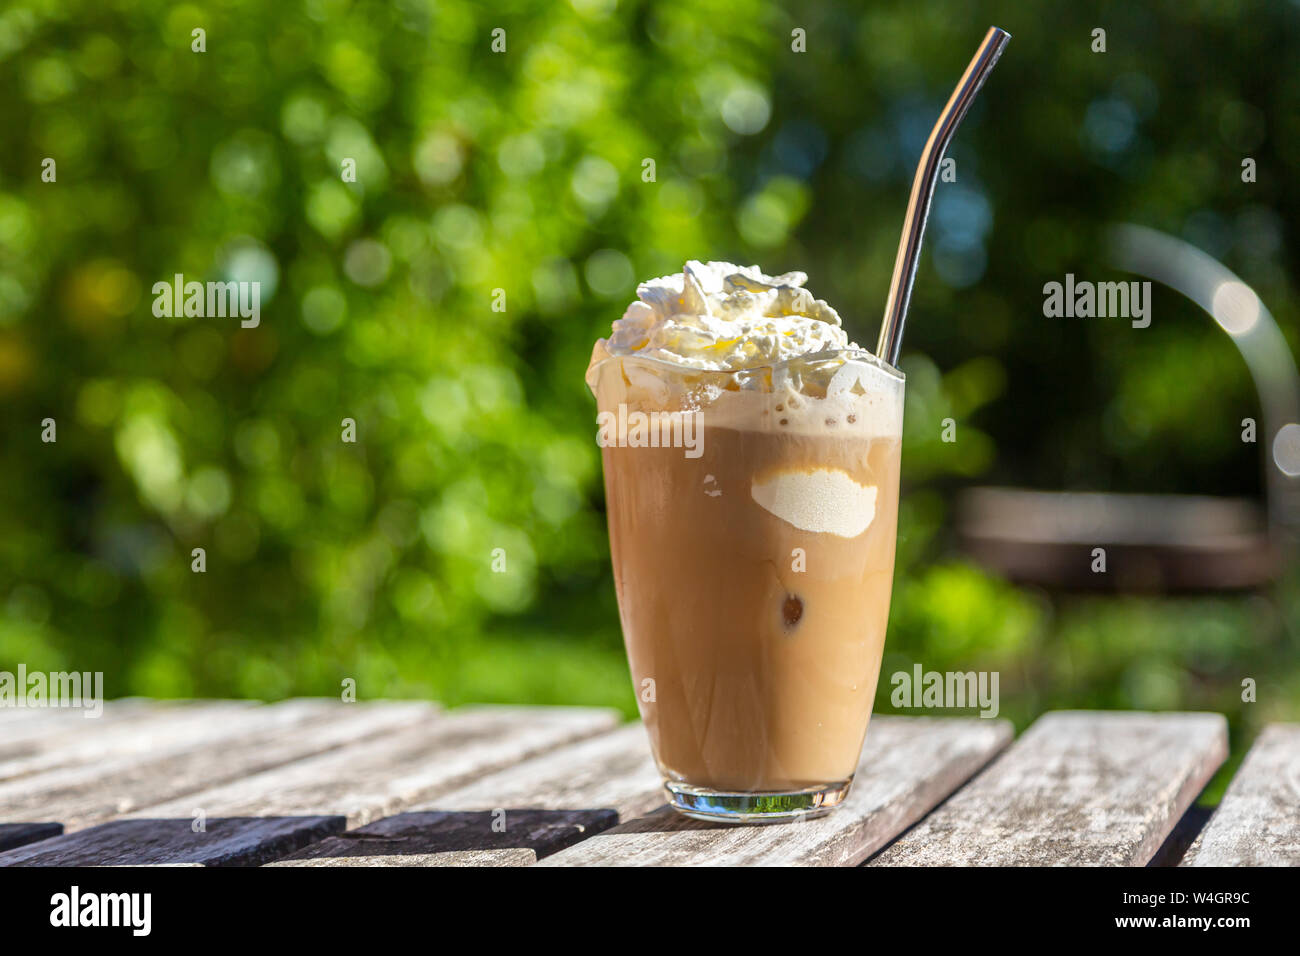 Glass of iced coffee with cream topping on garden table Stock Photo